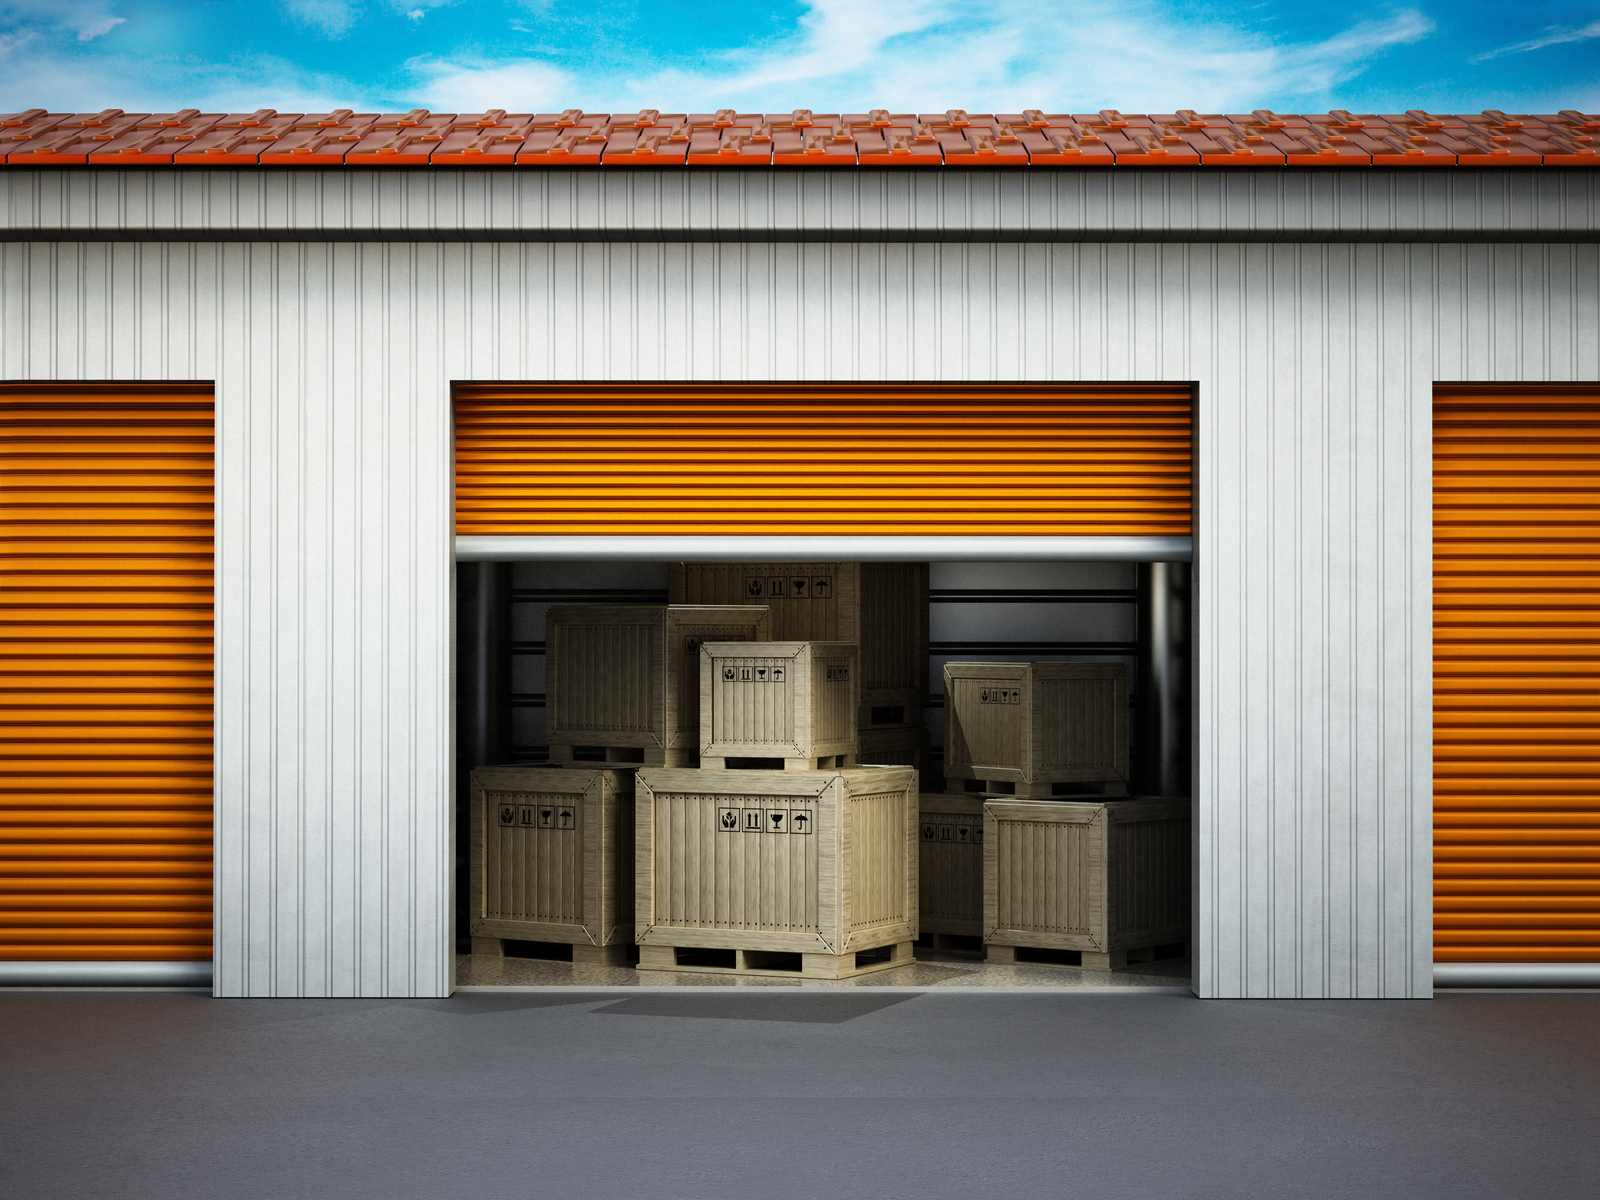 The Types of Items You Can Put into Self-Storage